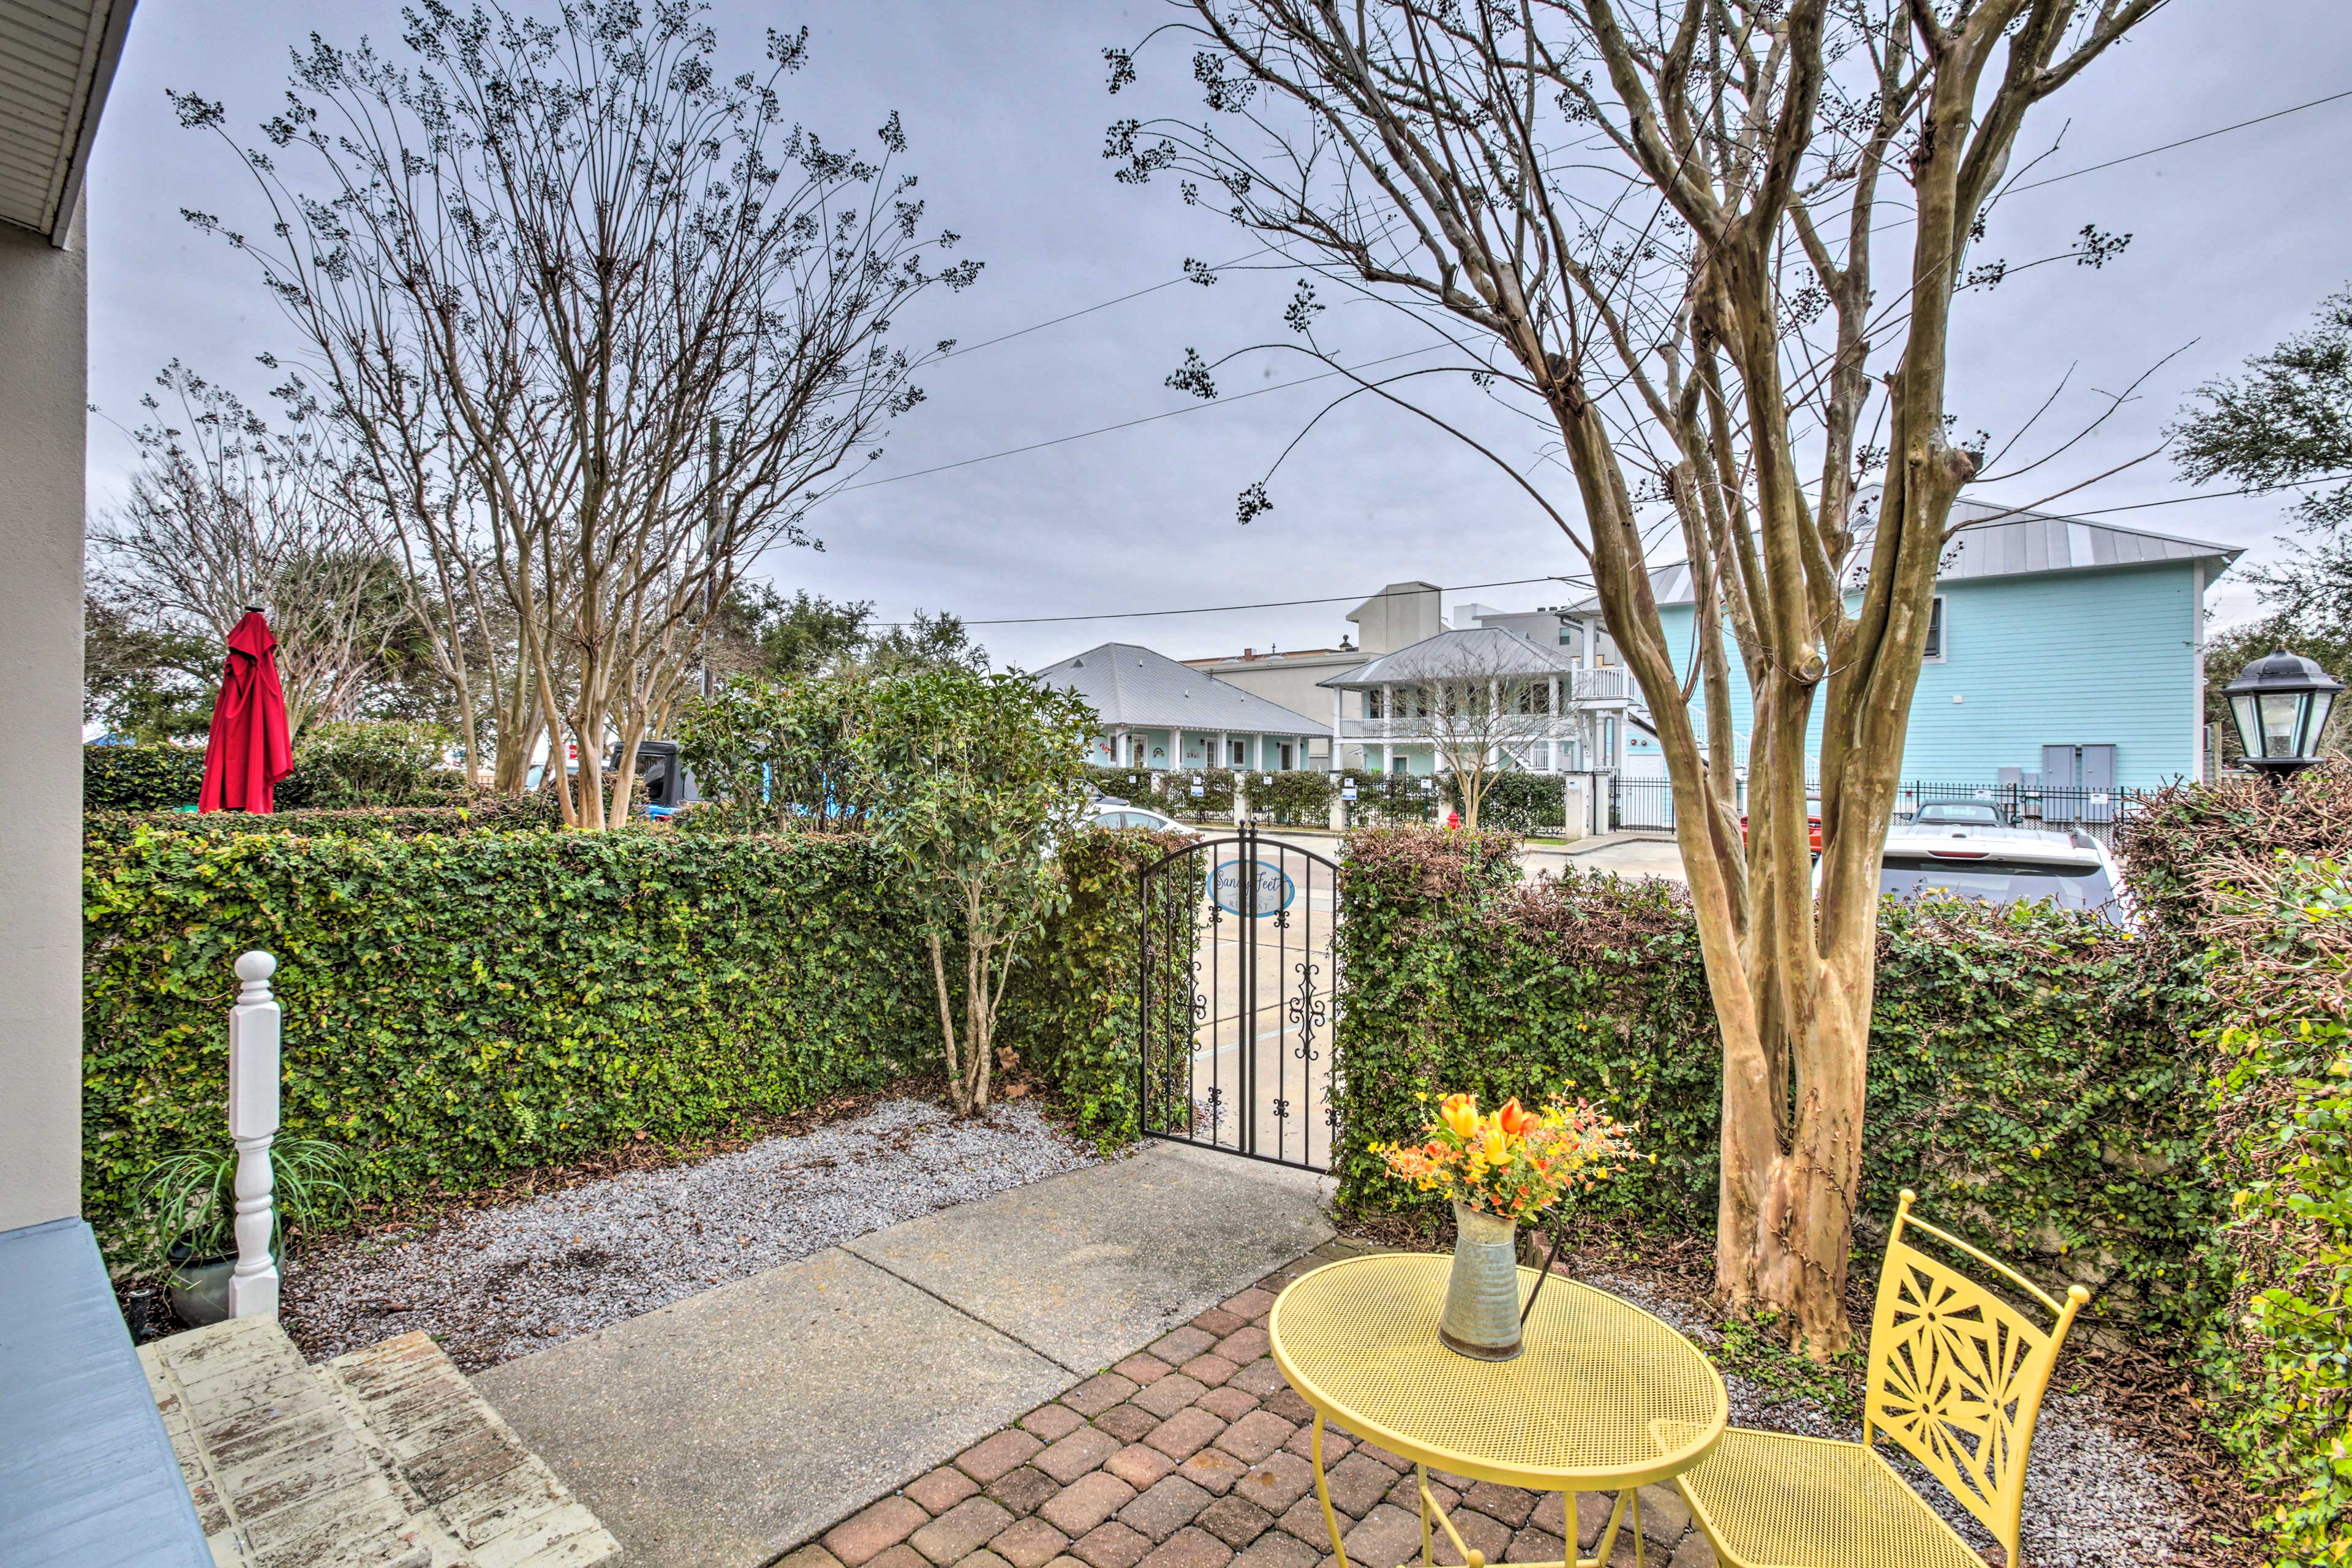 Property Image 2 - Old Town Bay St Louis Townhome: Walk to Beach